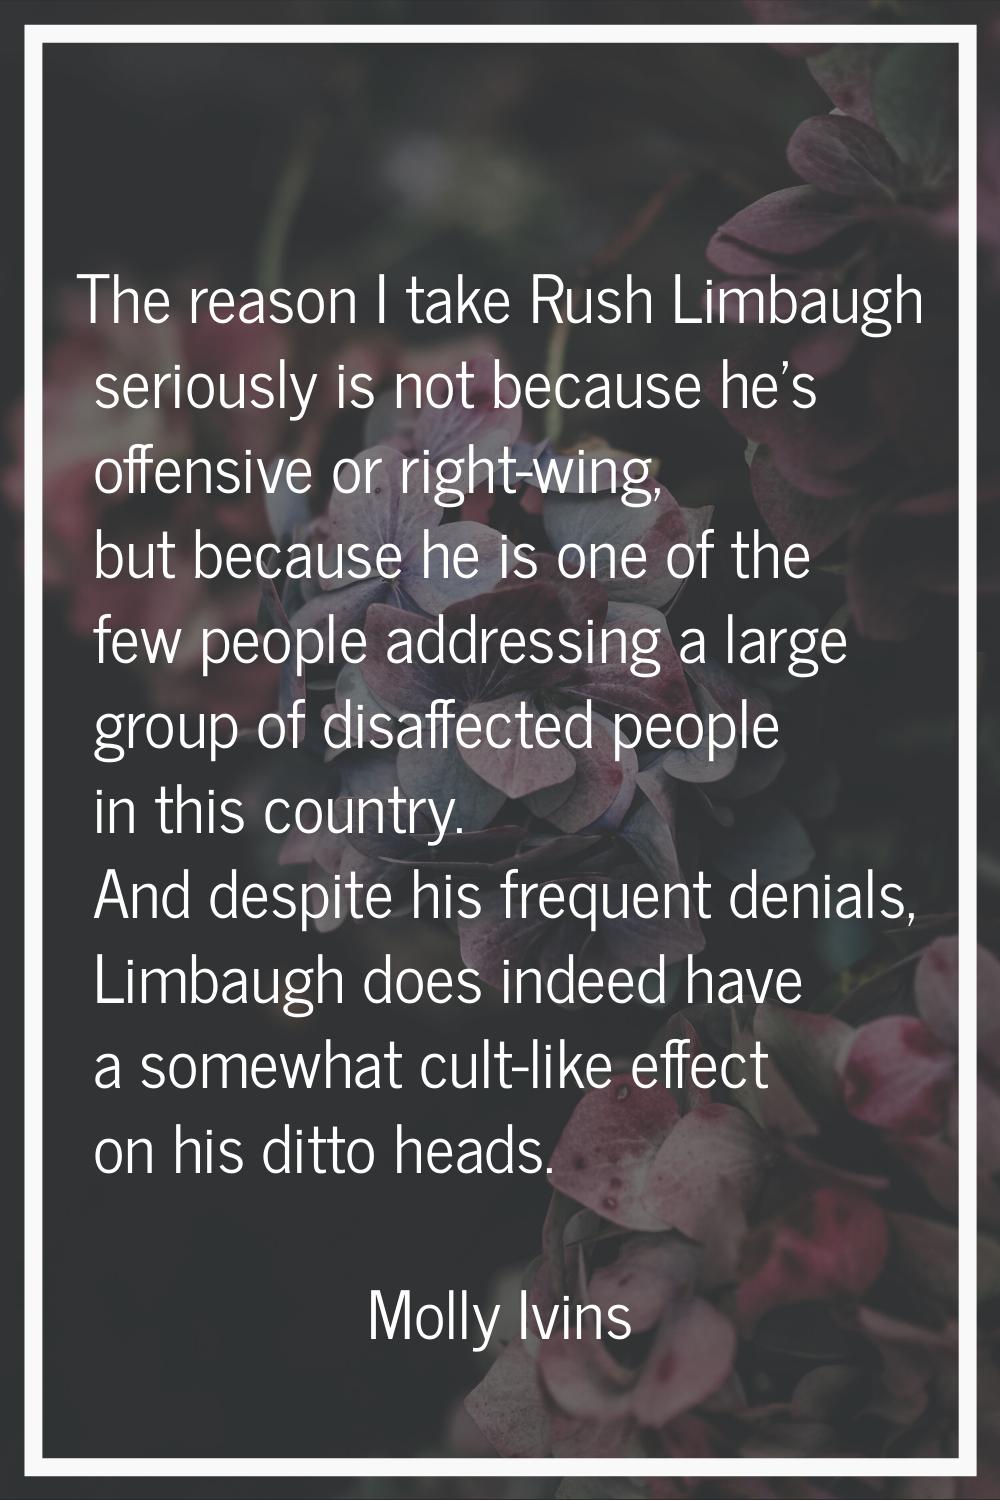 The reason I take Rush Limbaugh seriously is not because he's offensive or right-wing, but because 